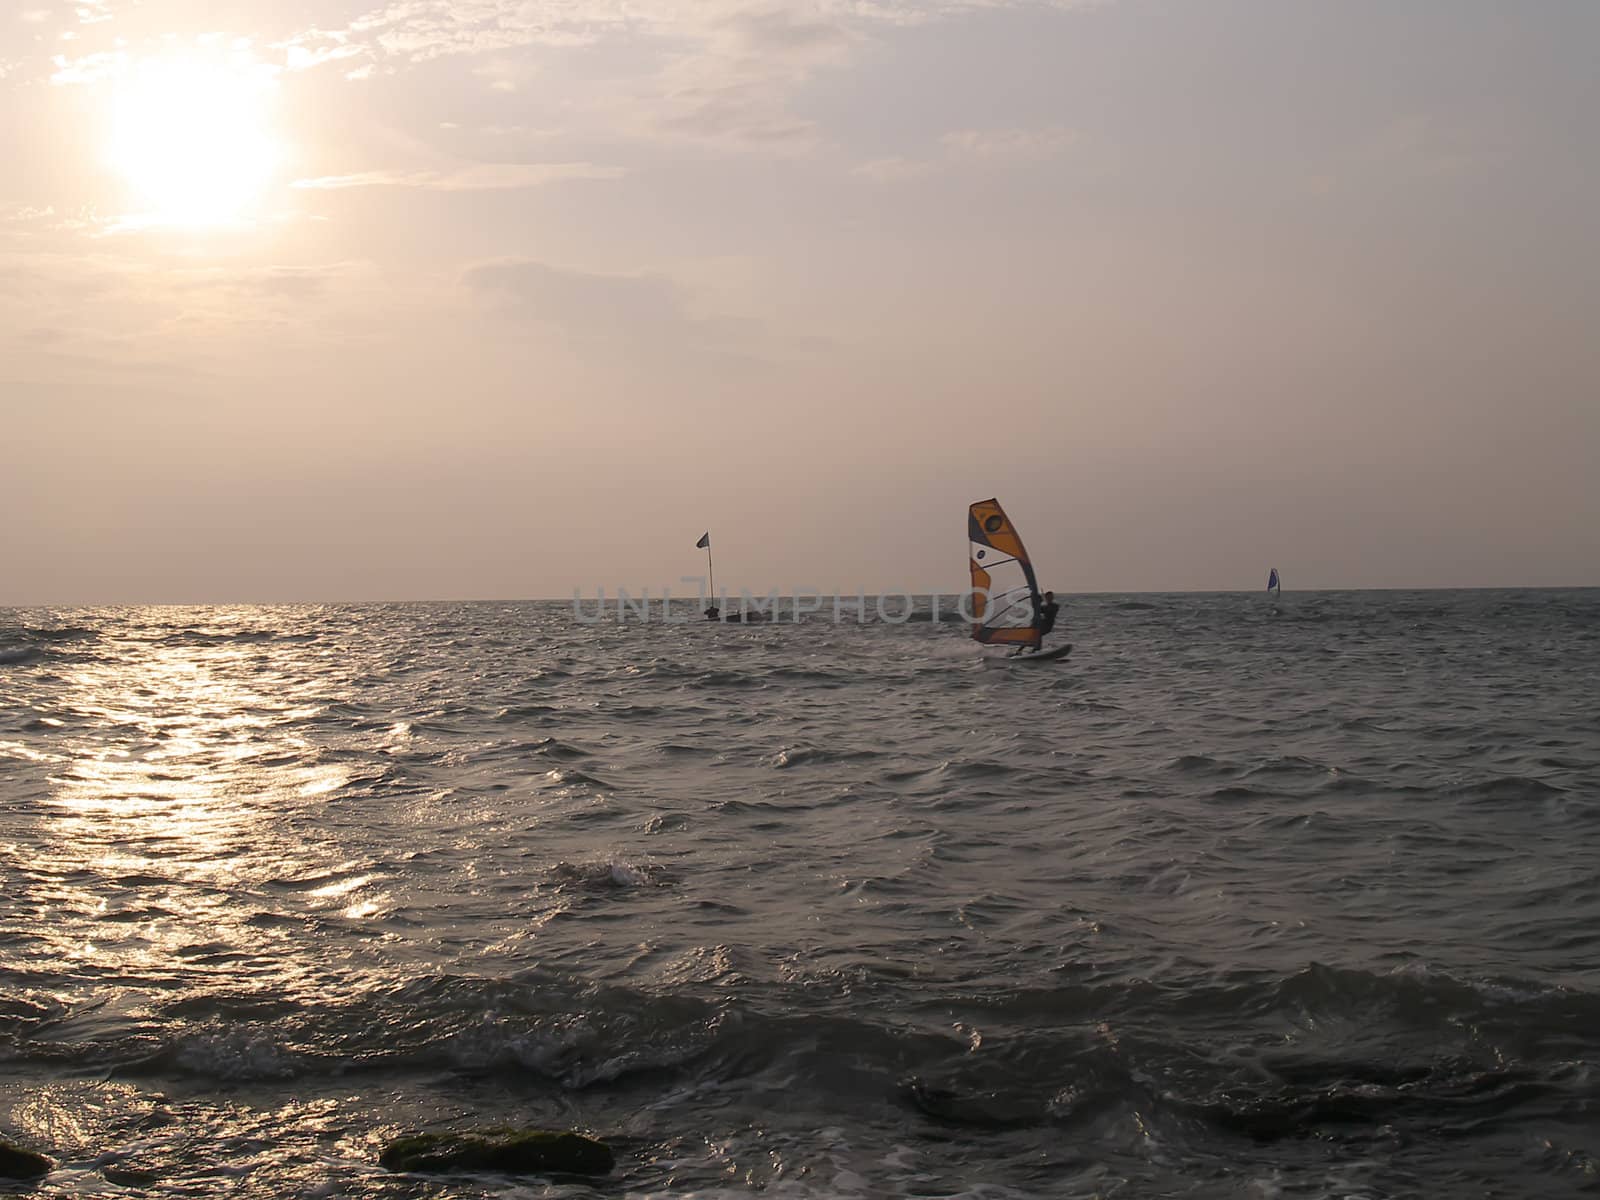 A windsurfing in front of the setting sun